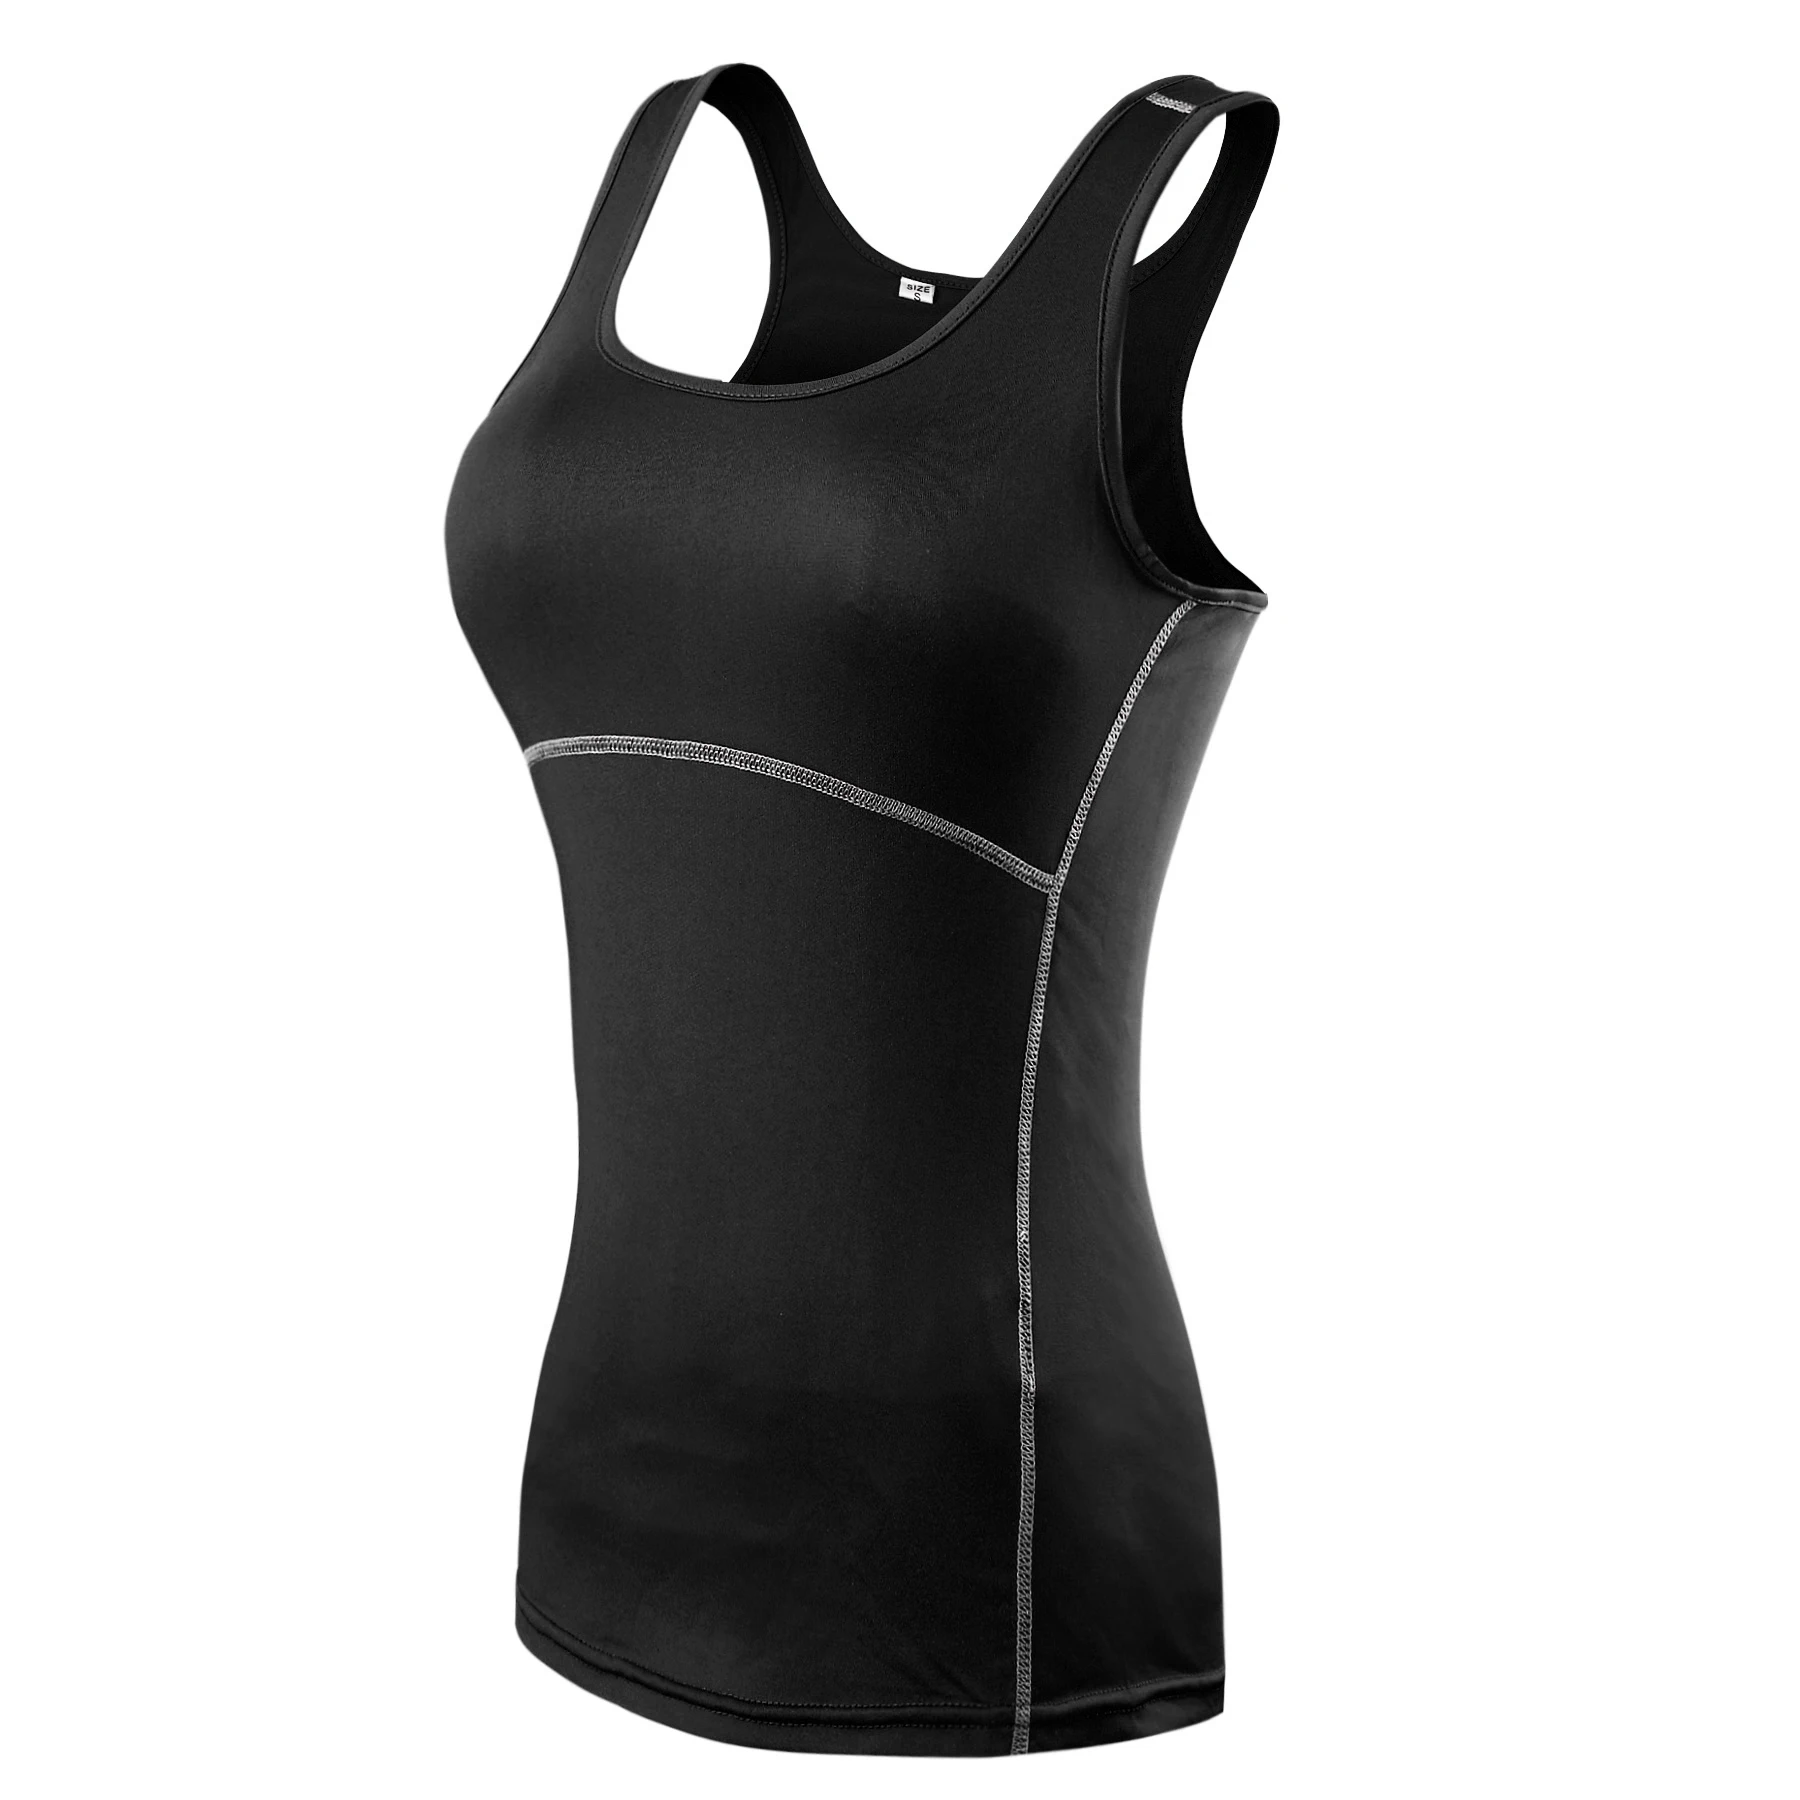 fonoun-women-sports-vest-for-running-yoga-quick-dry-stretch-breathable-antiwrikle-soft-absorb-sweat-sc01